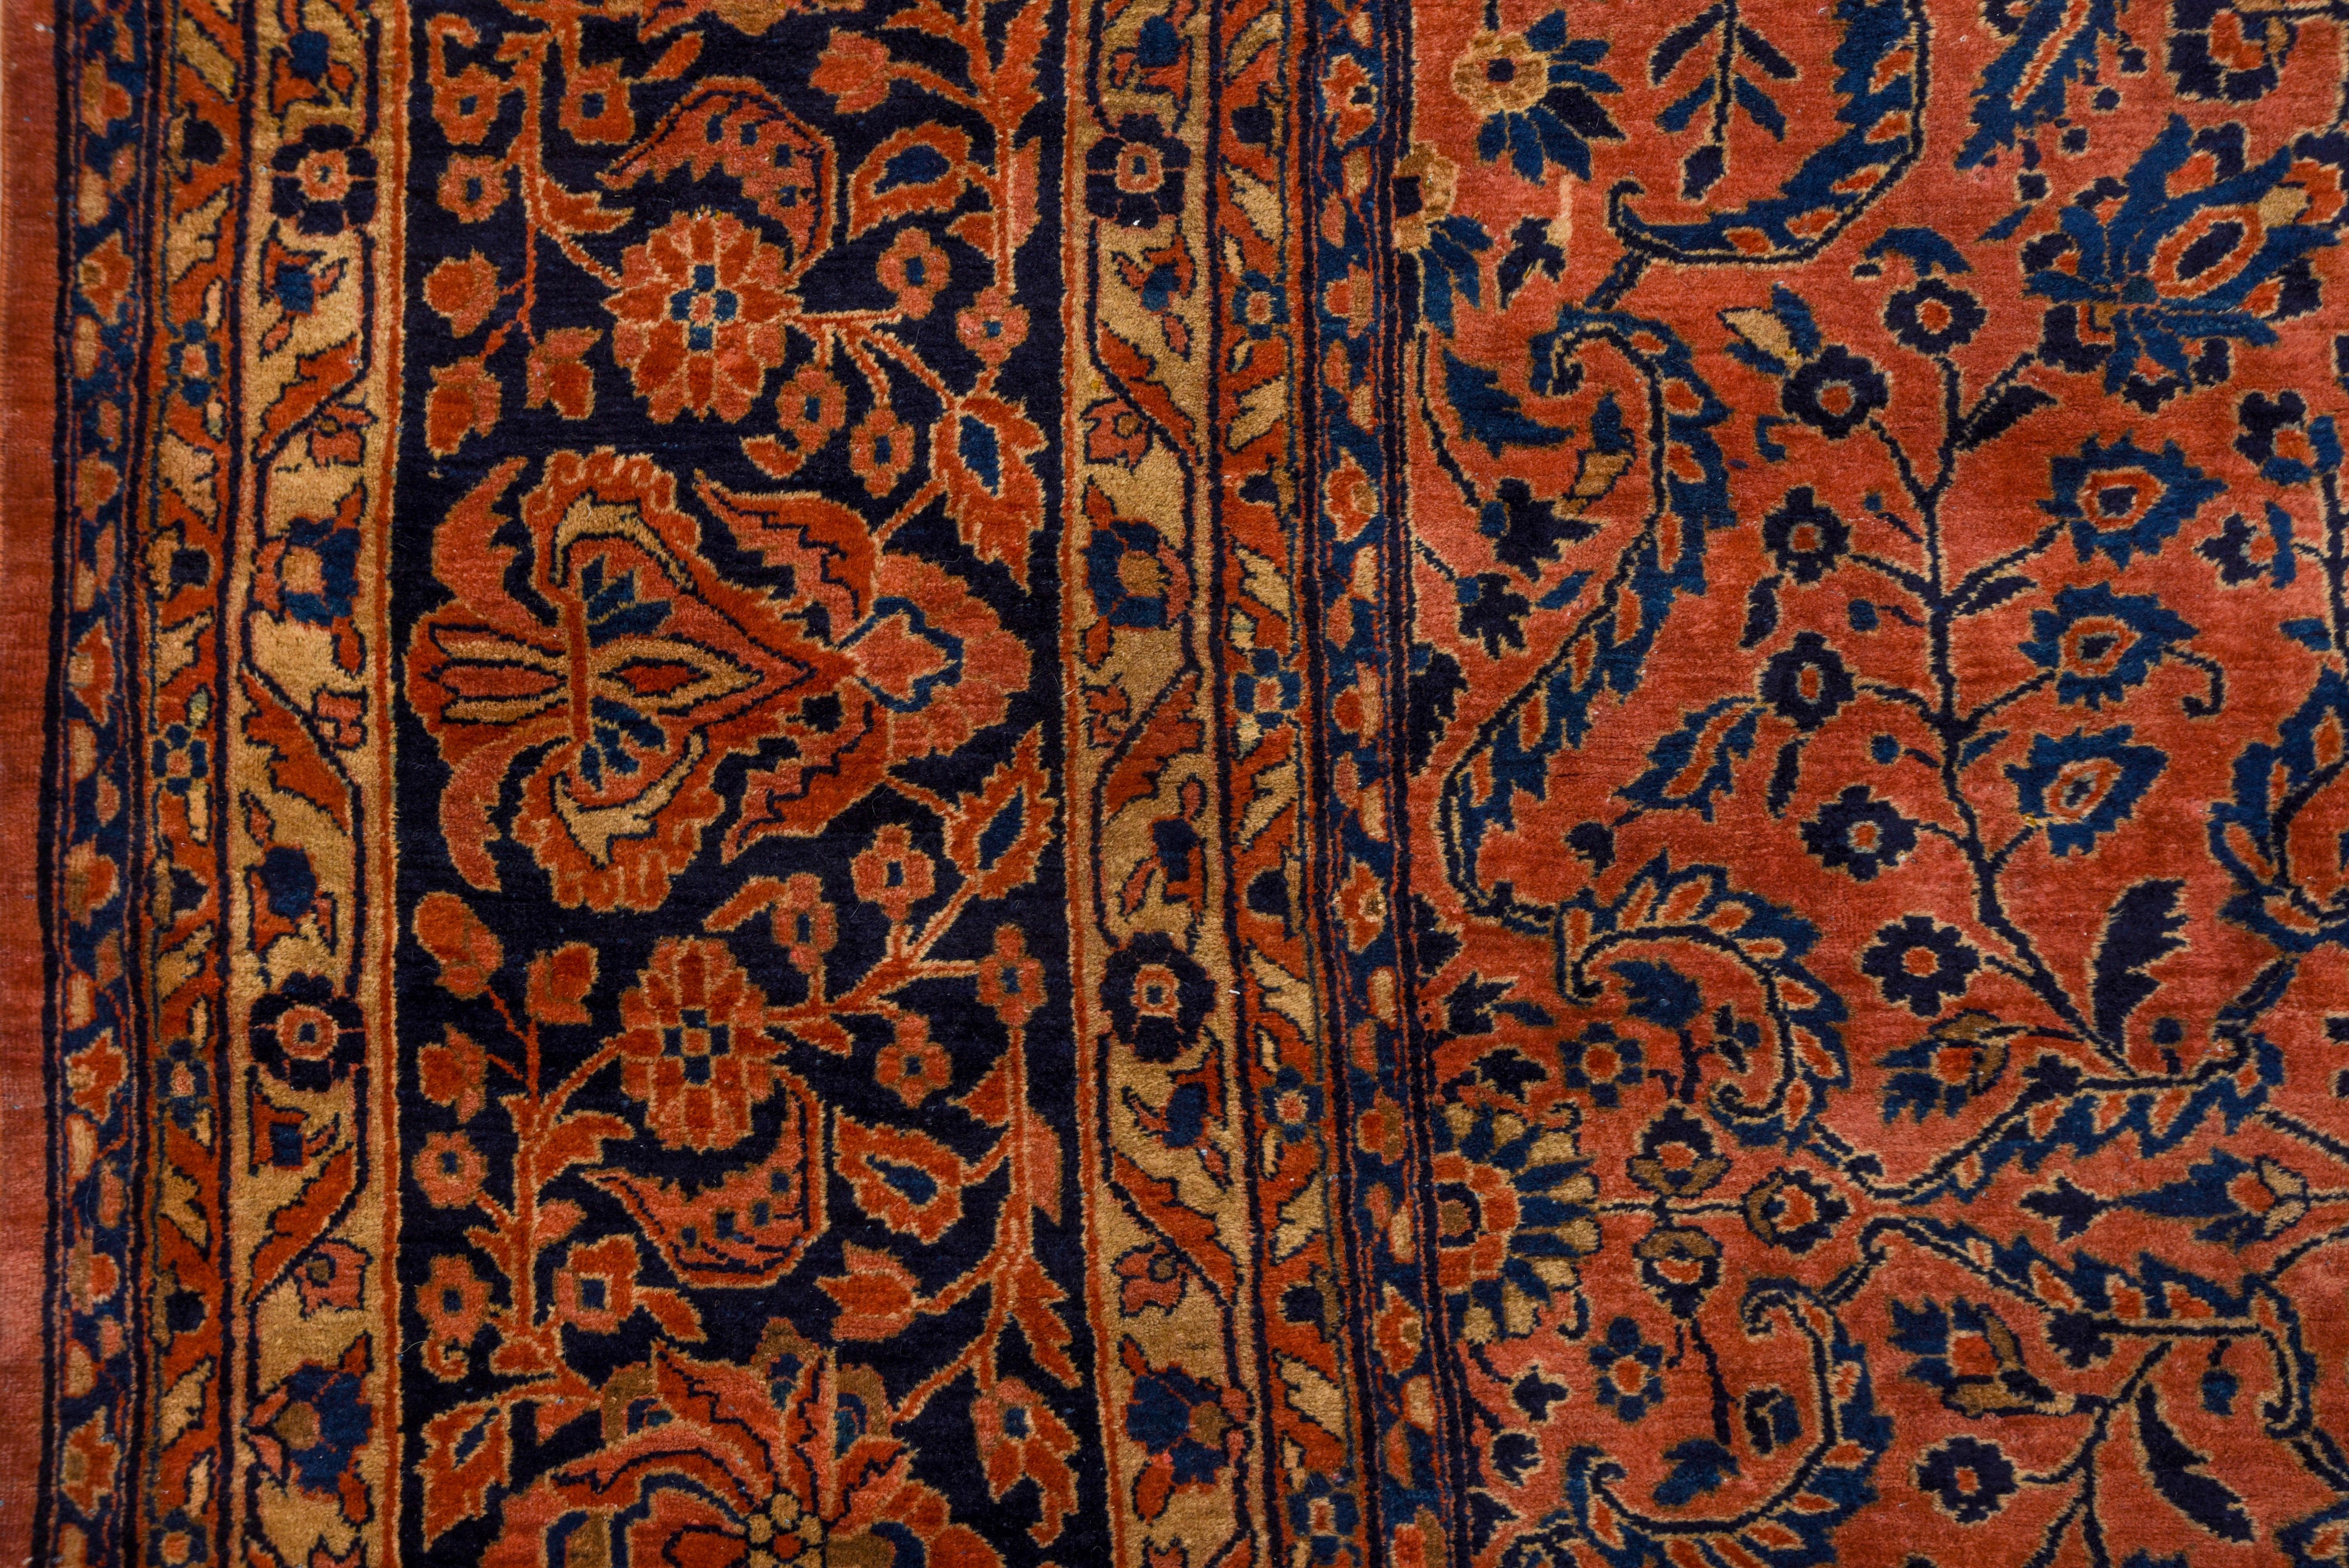 Mid-20th Century Antique Persian Sarouk Gallery Carpet, Orange Allover Field, Mansion Style For Sale